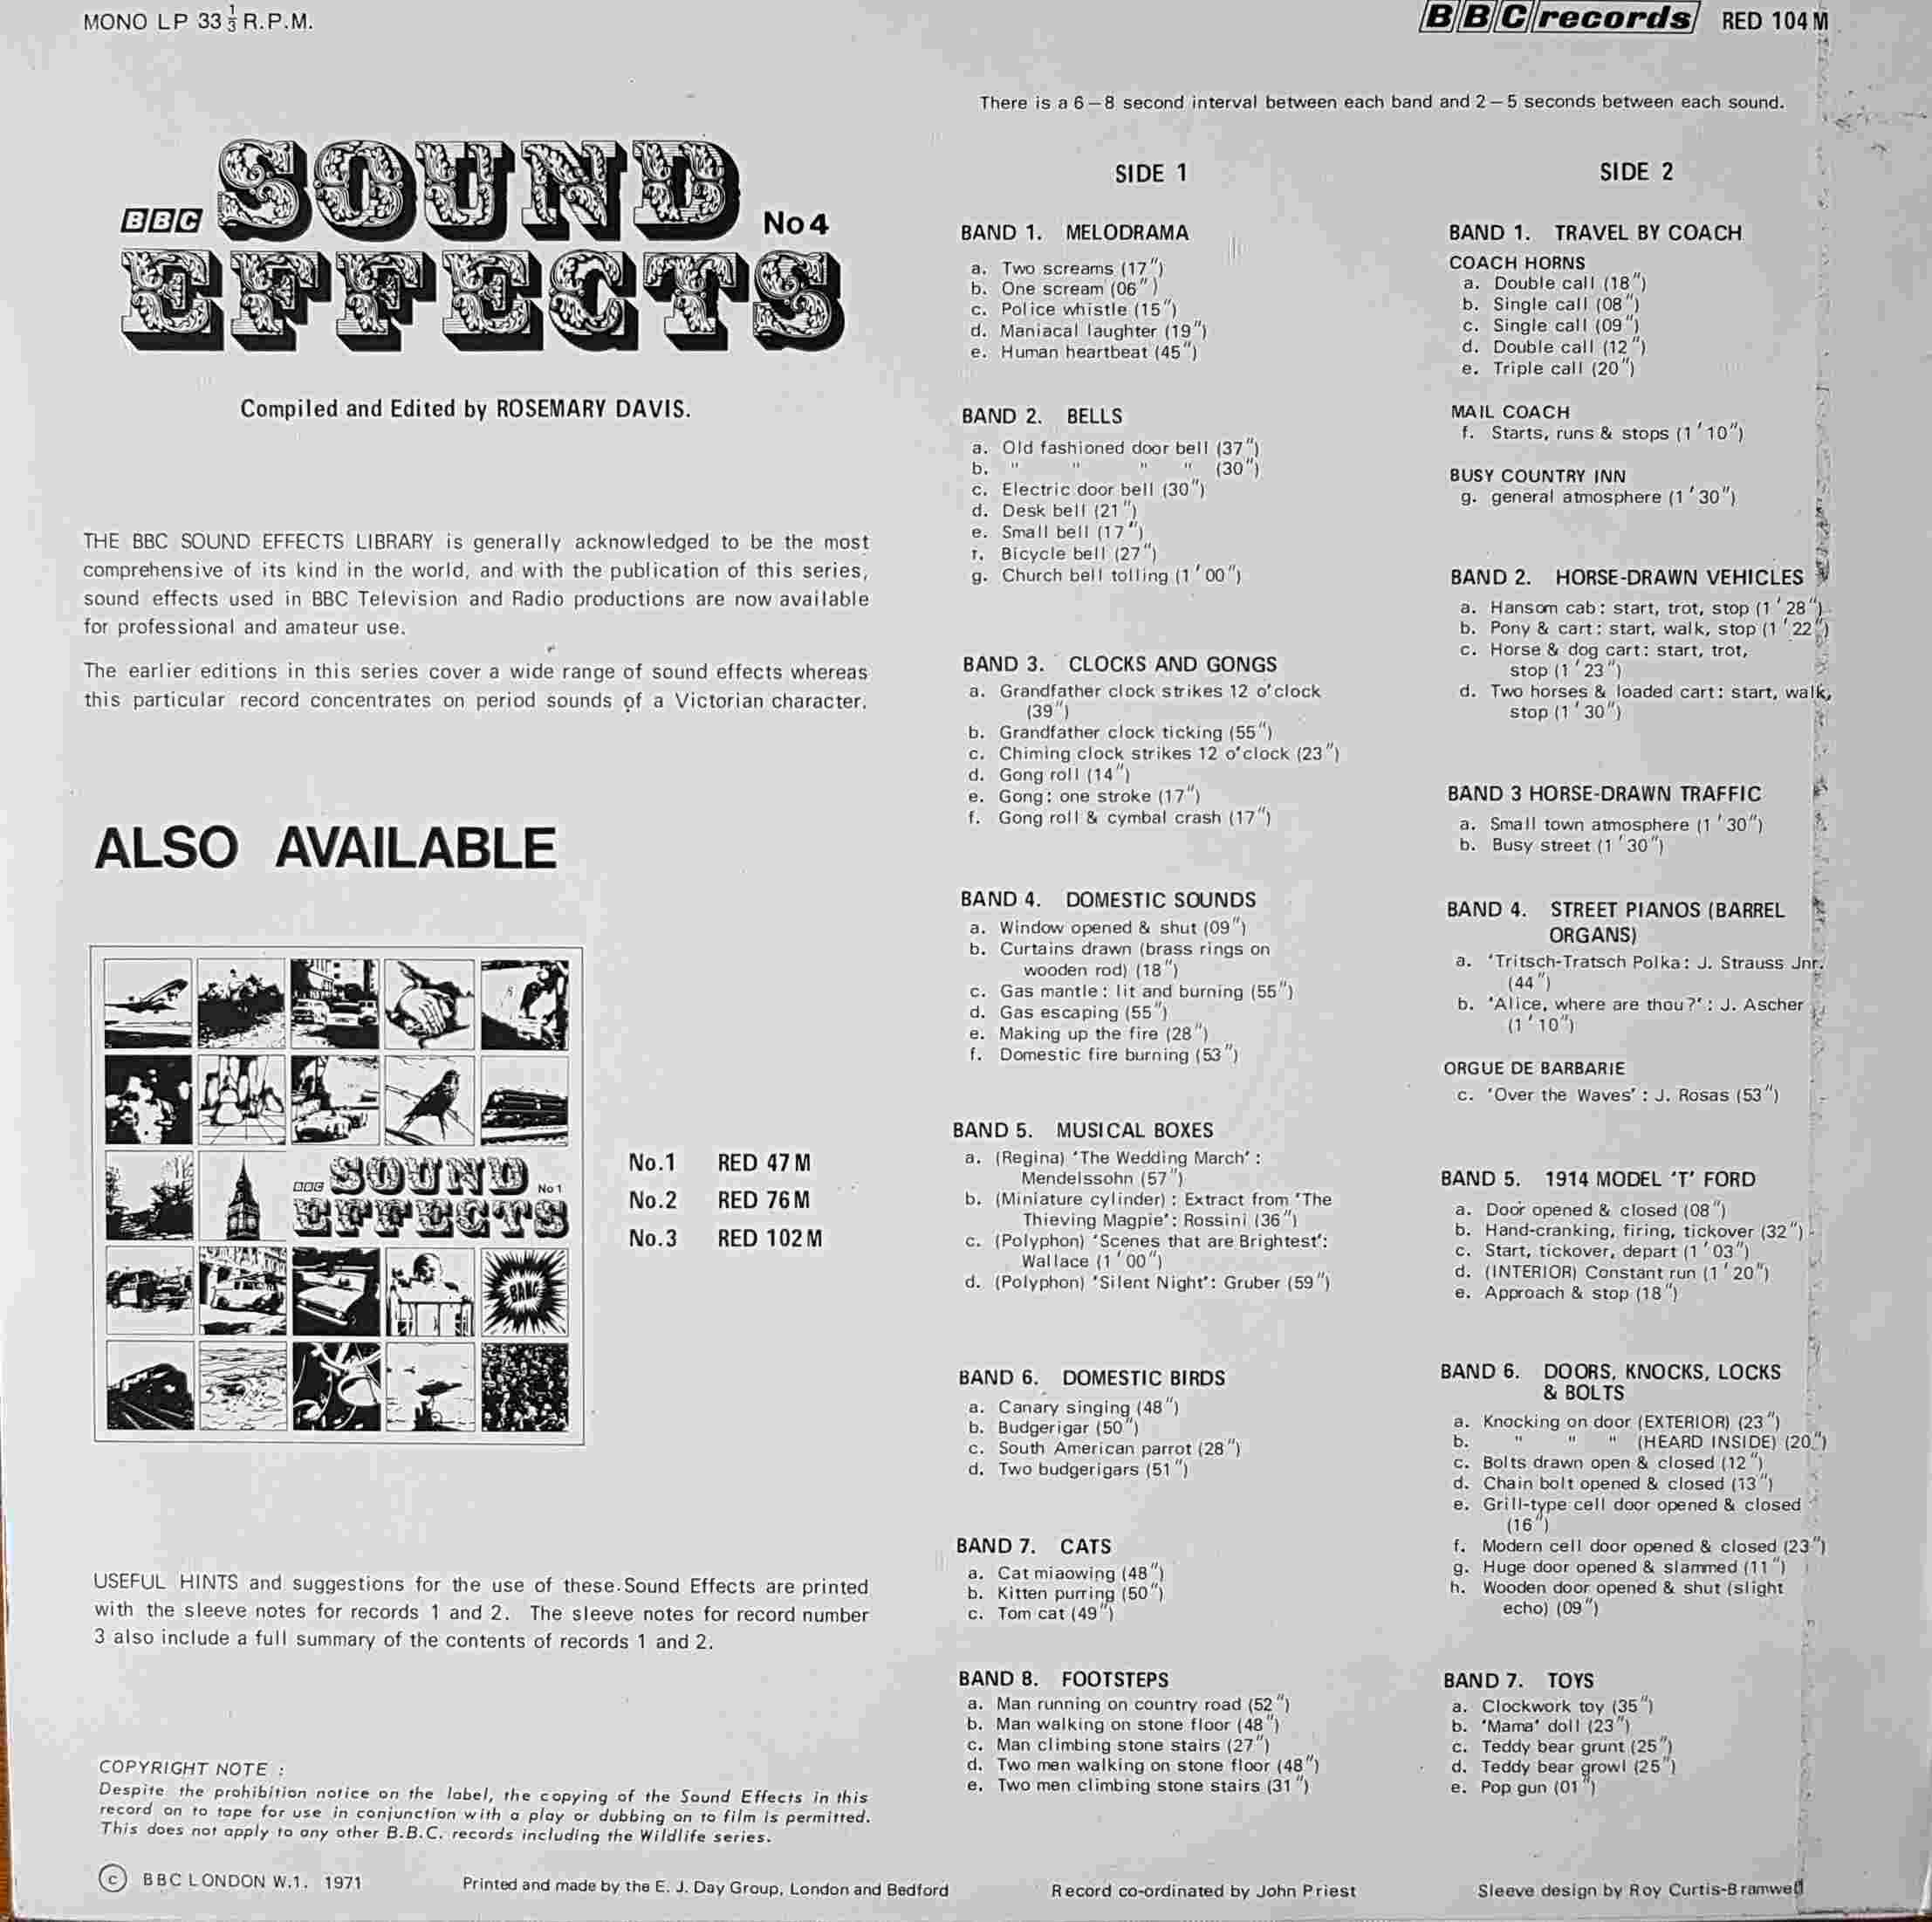 Picture of RED 104 Sound effects no. 4 by artist Various from the BBC records and Tapes library